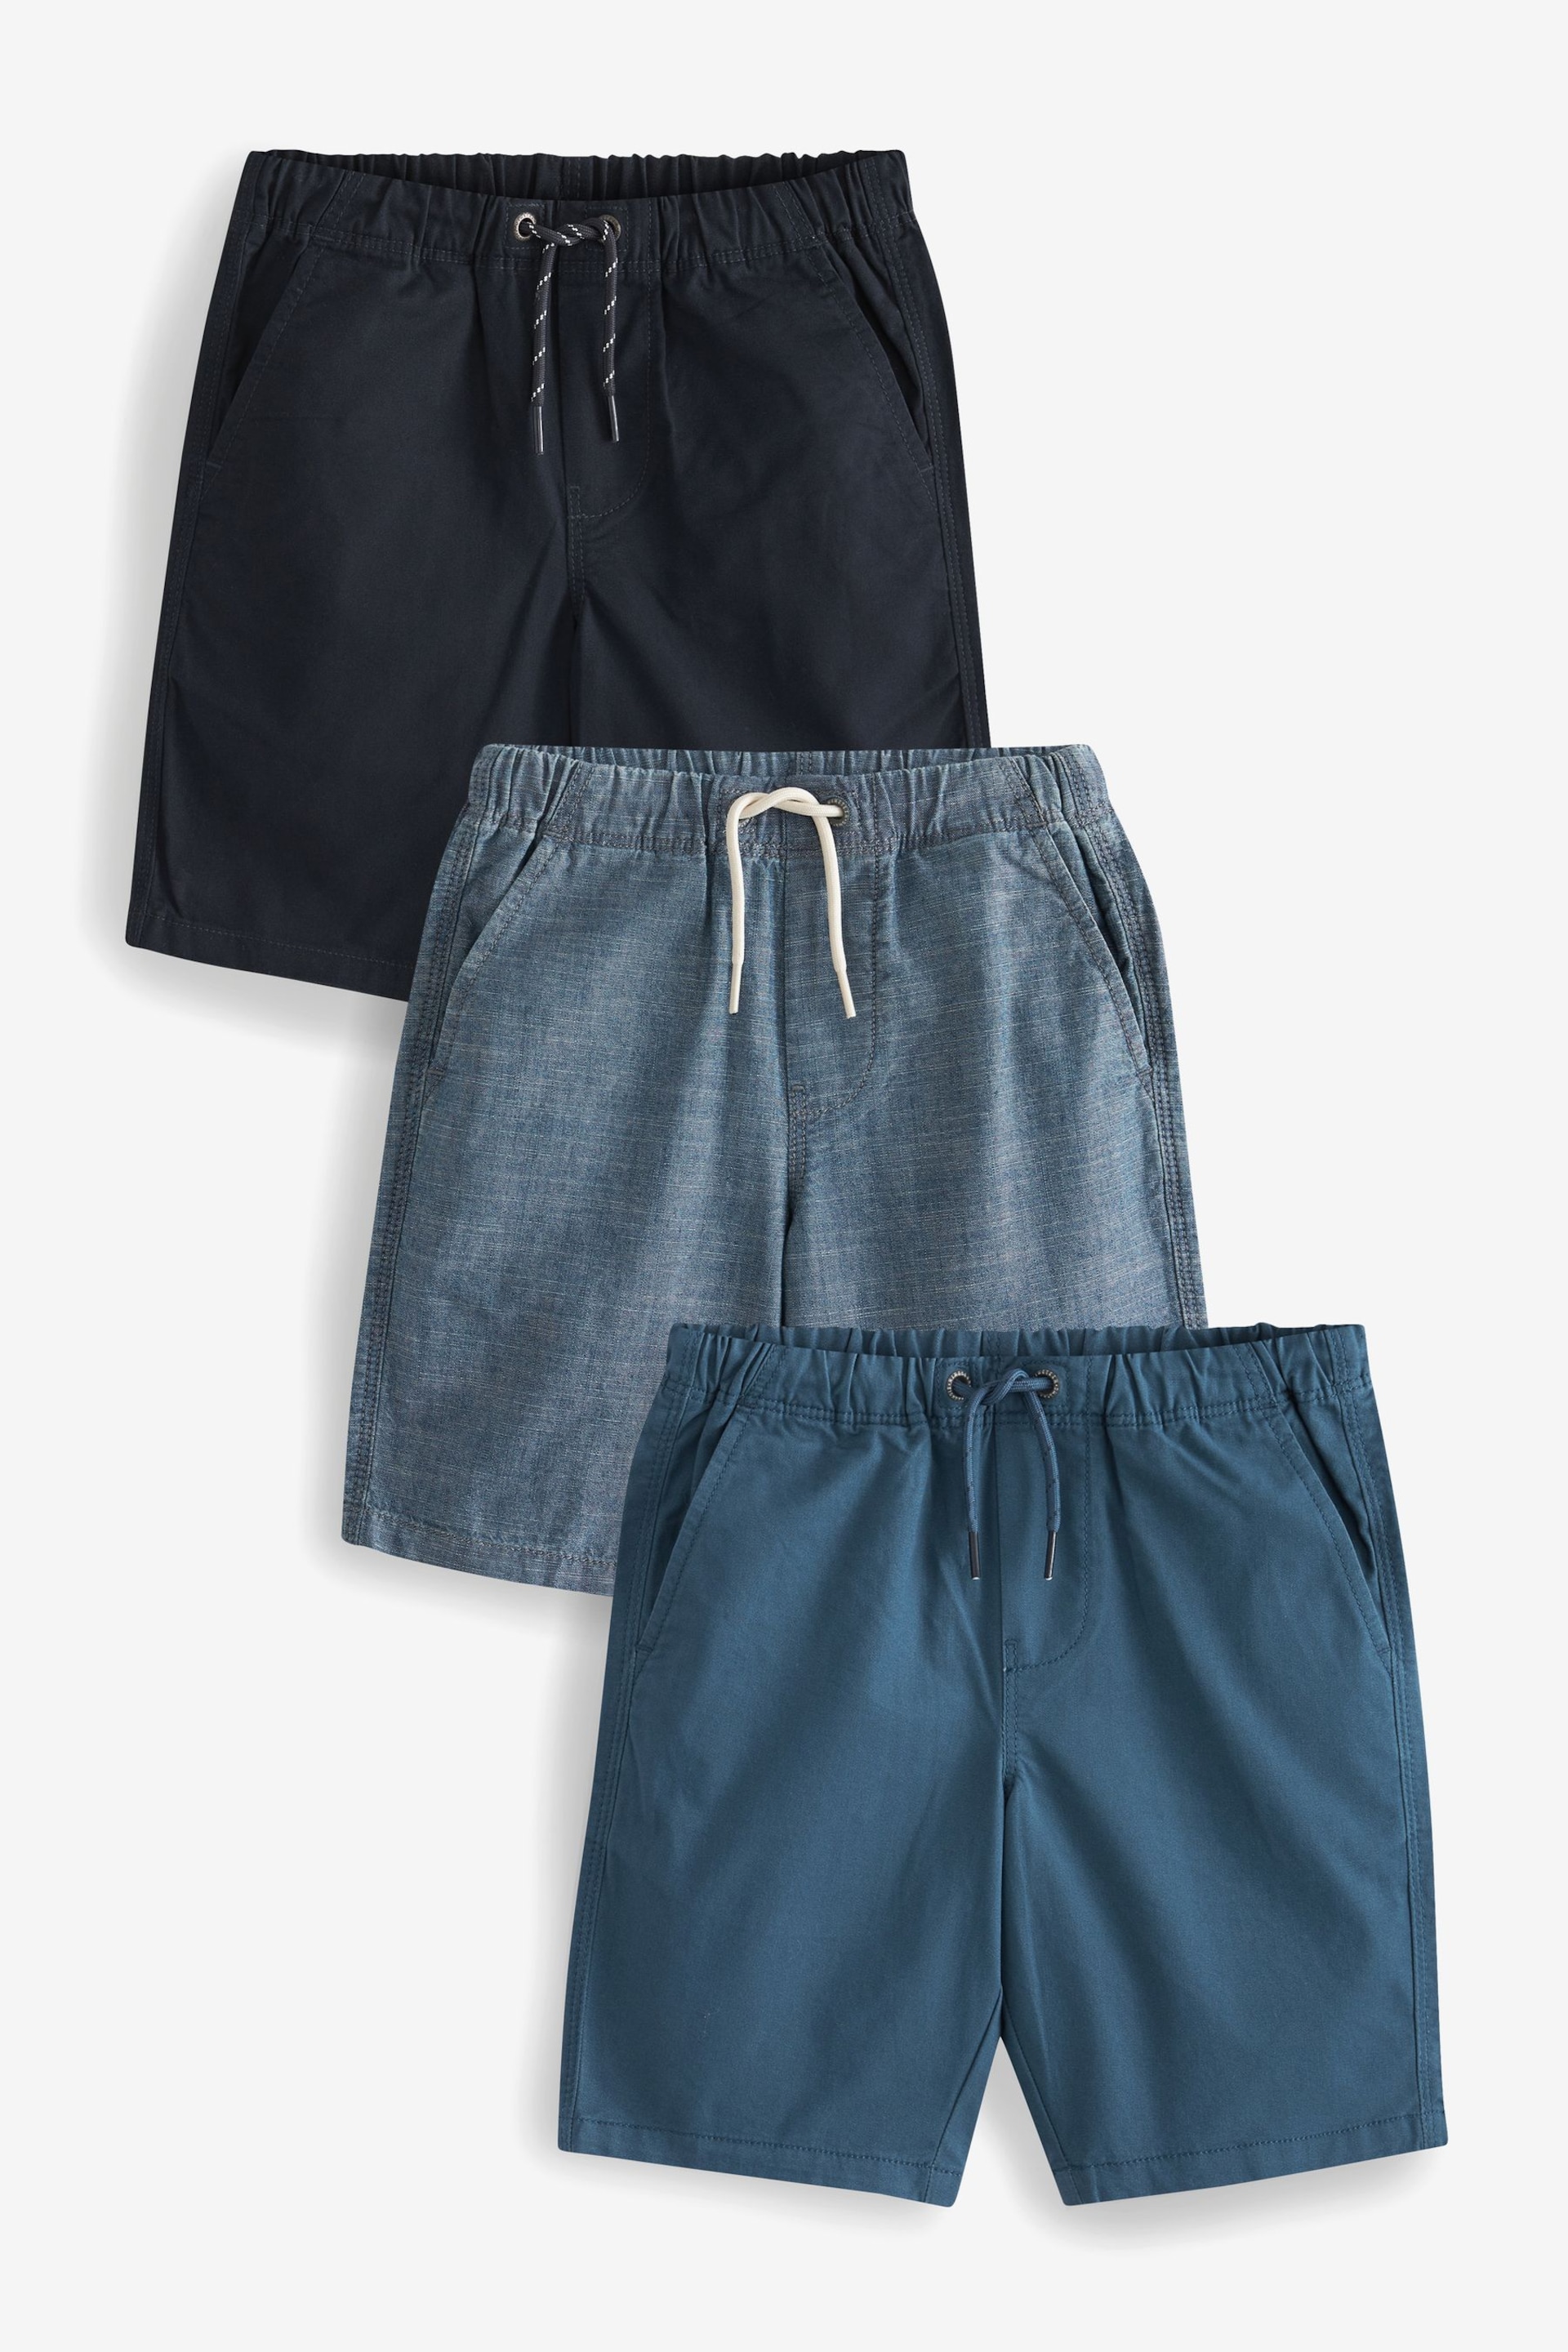 Blue Pull-On Shorts 3 Pack (3-16yrs) - Image 1 of 5